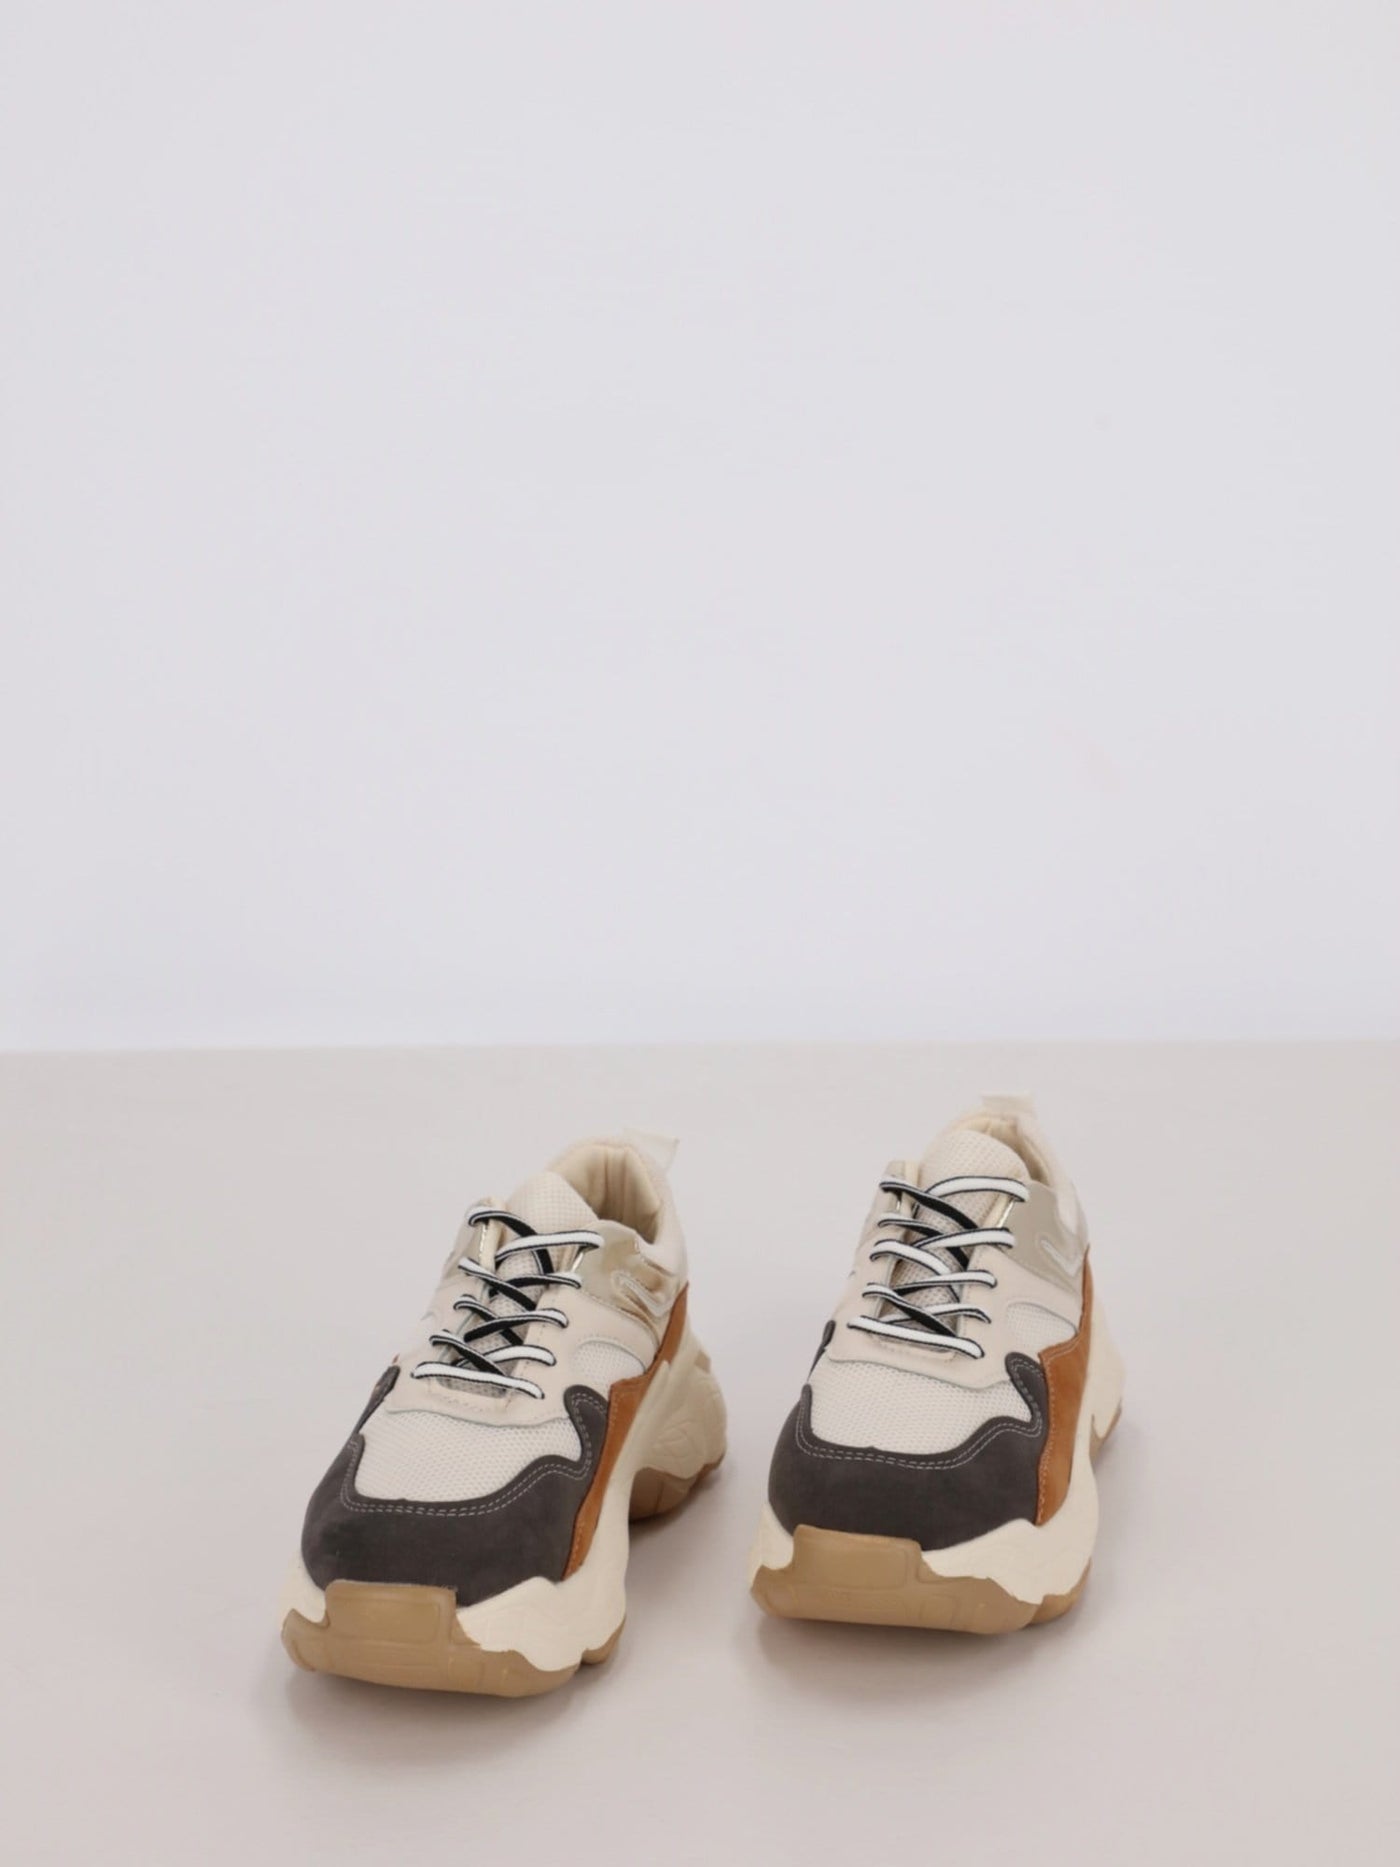 OR Sneakers Beige / 37 Mega Platform Sneakers with Leather, Mesh and Metallic Overlays